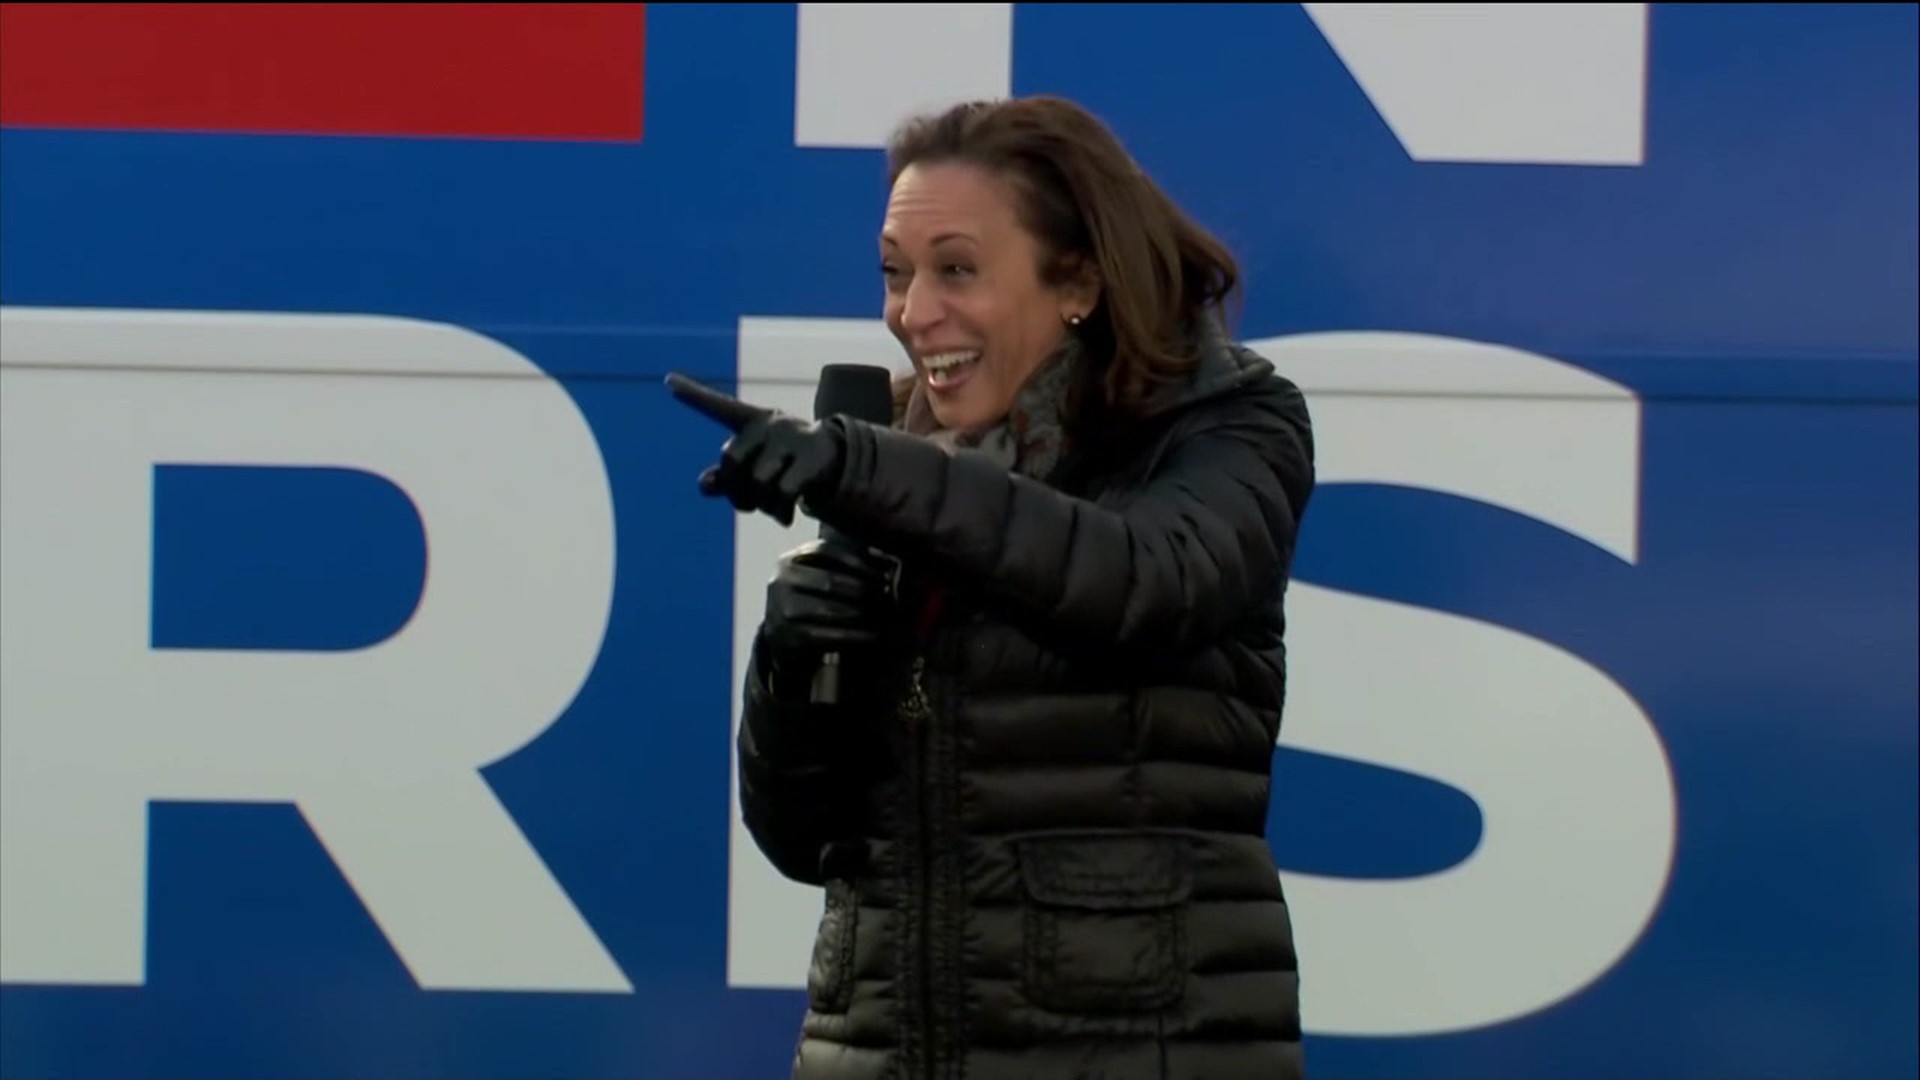 Sen. Harris spoke for the Democratic ticket at an outdoor rally in Jenkins Township.